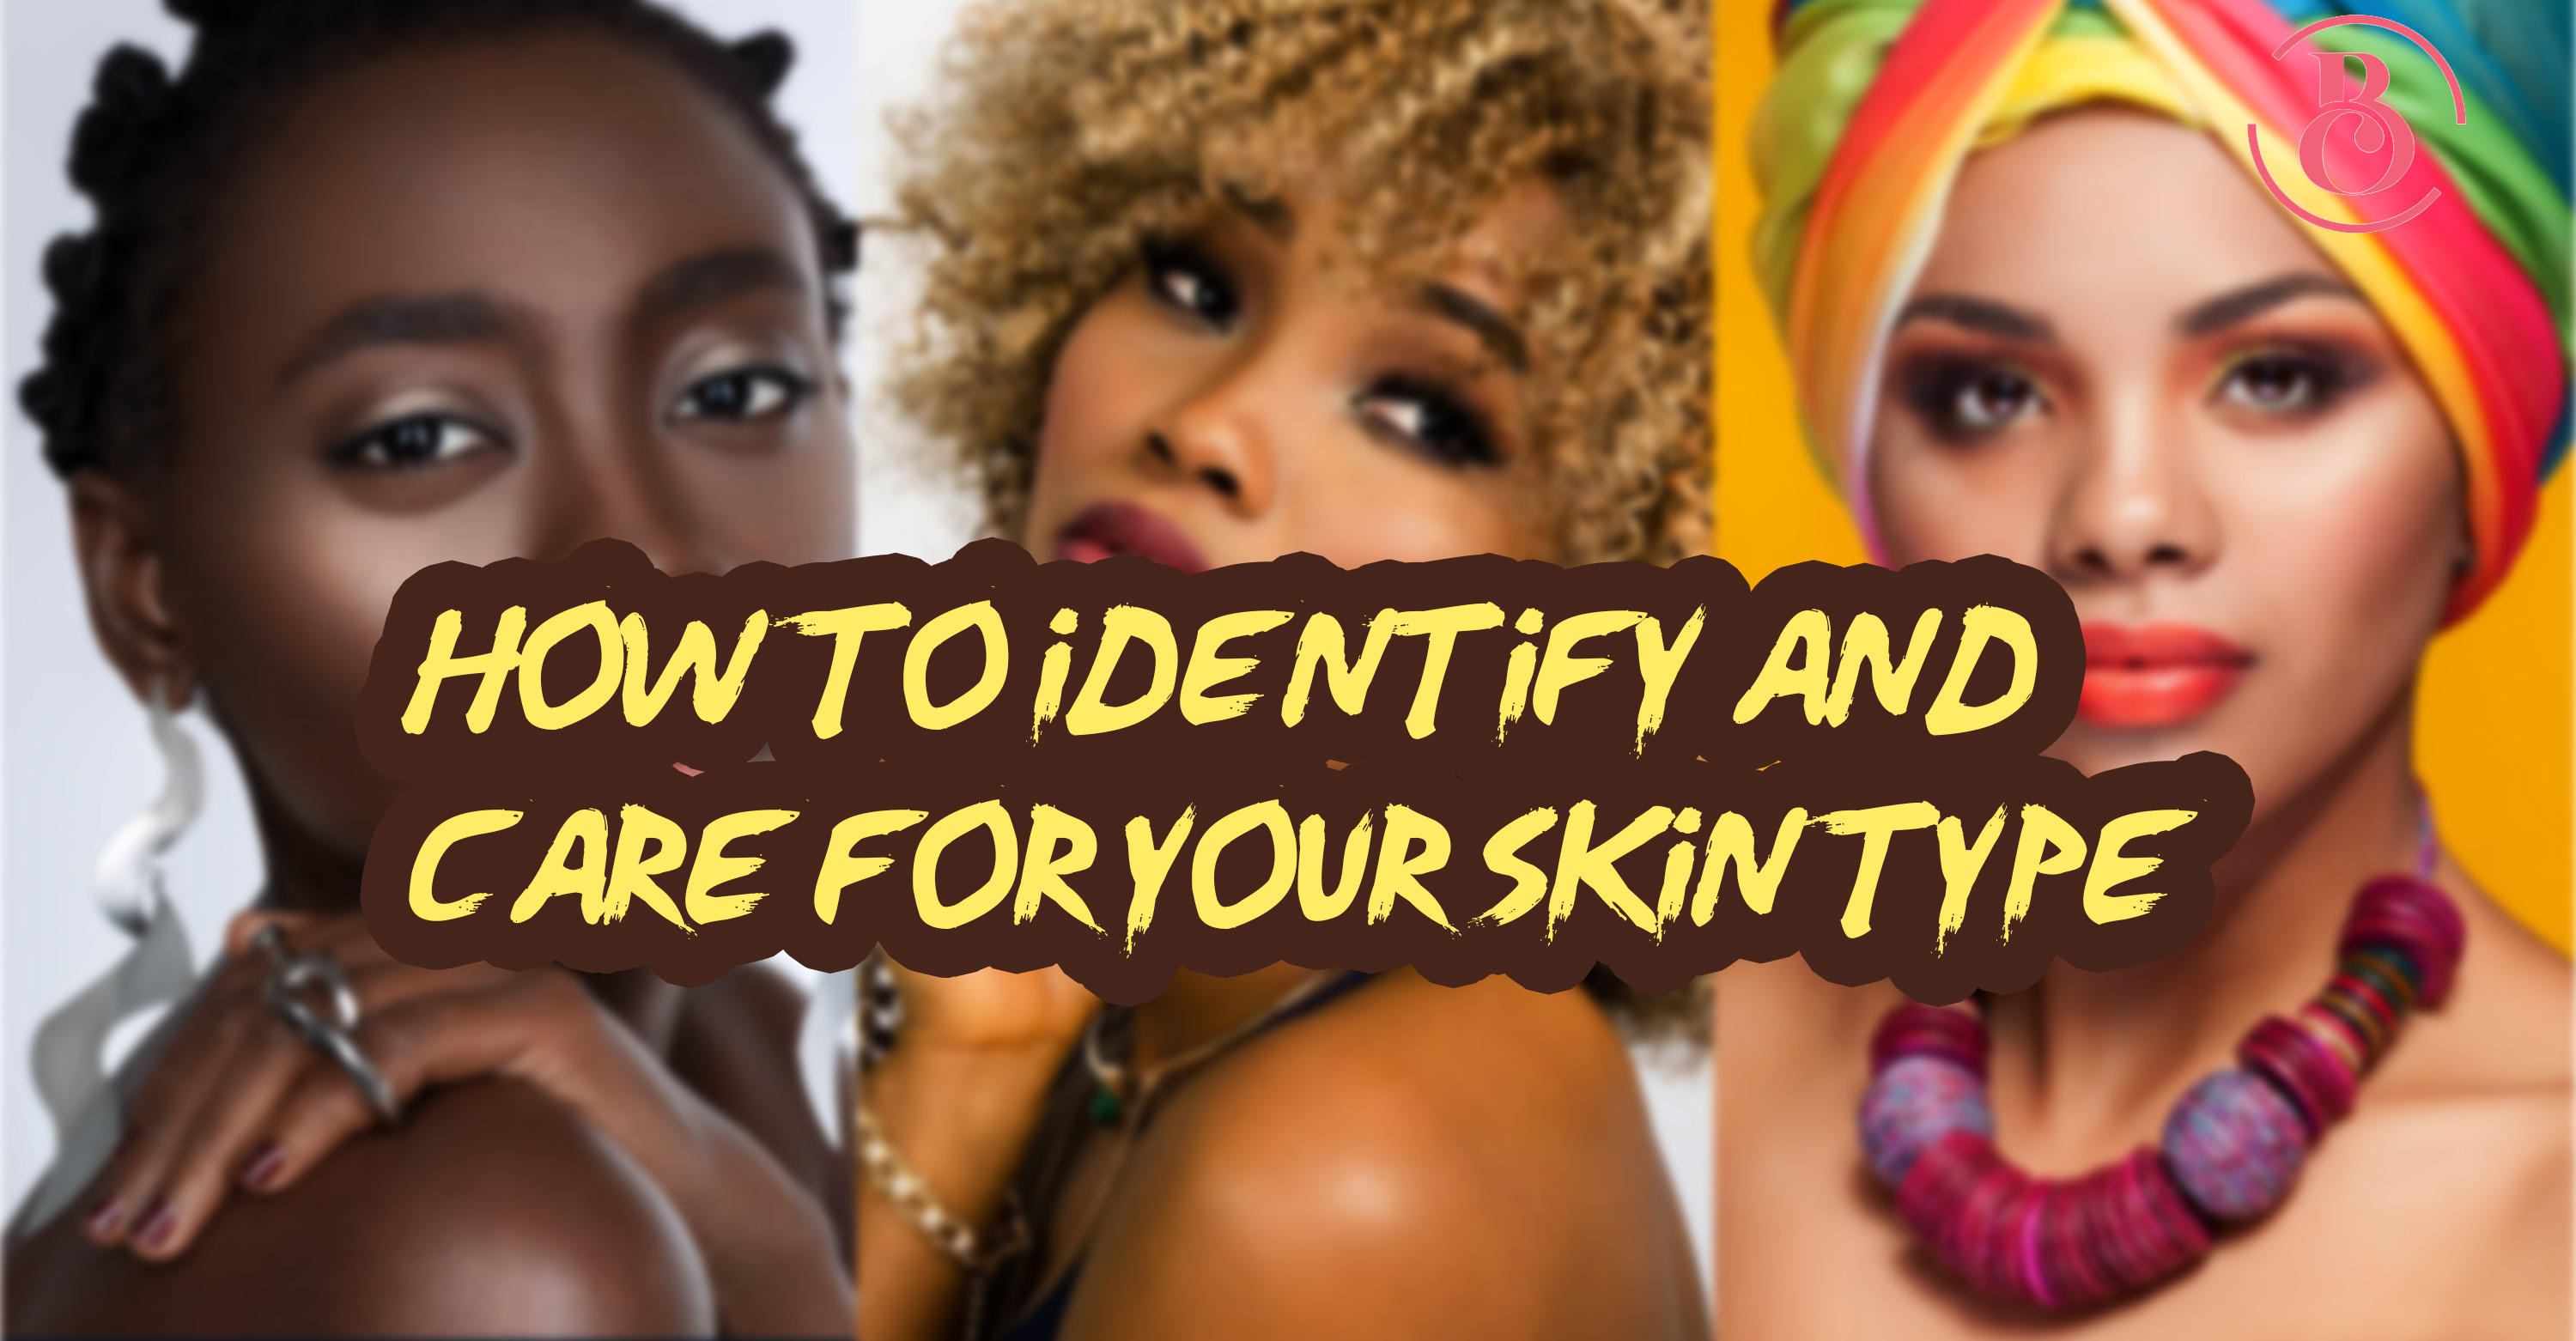 How to Identify and Care for Your Skin Type